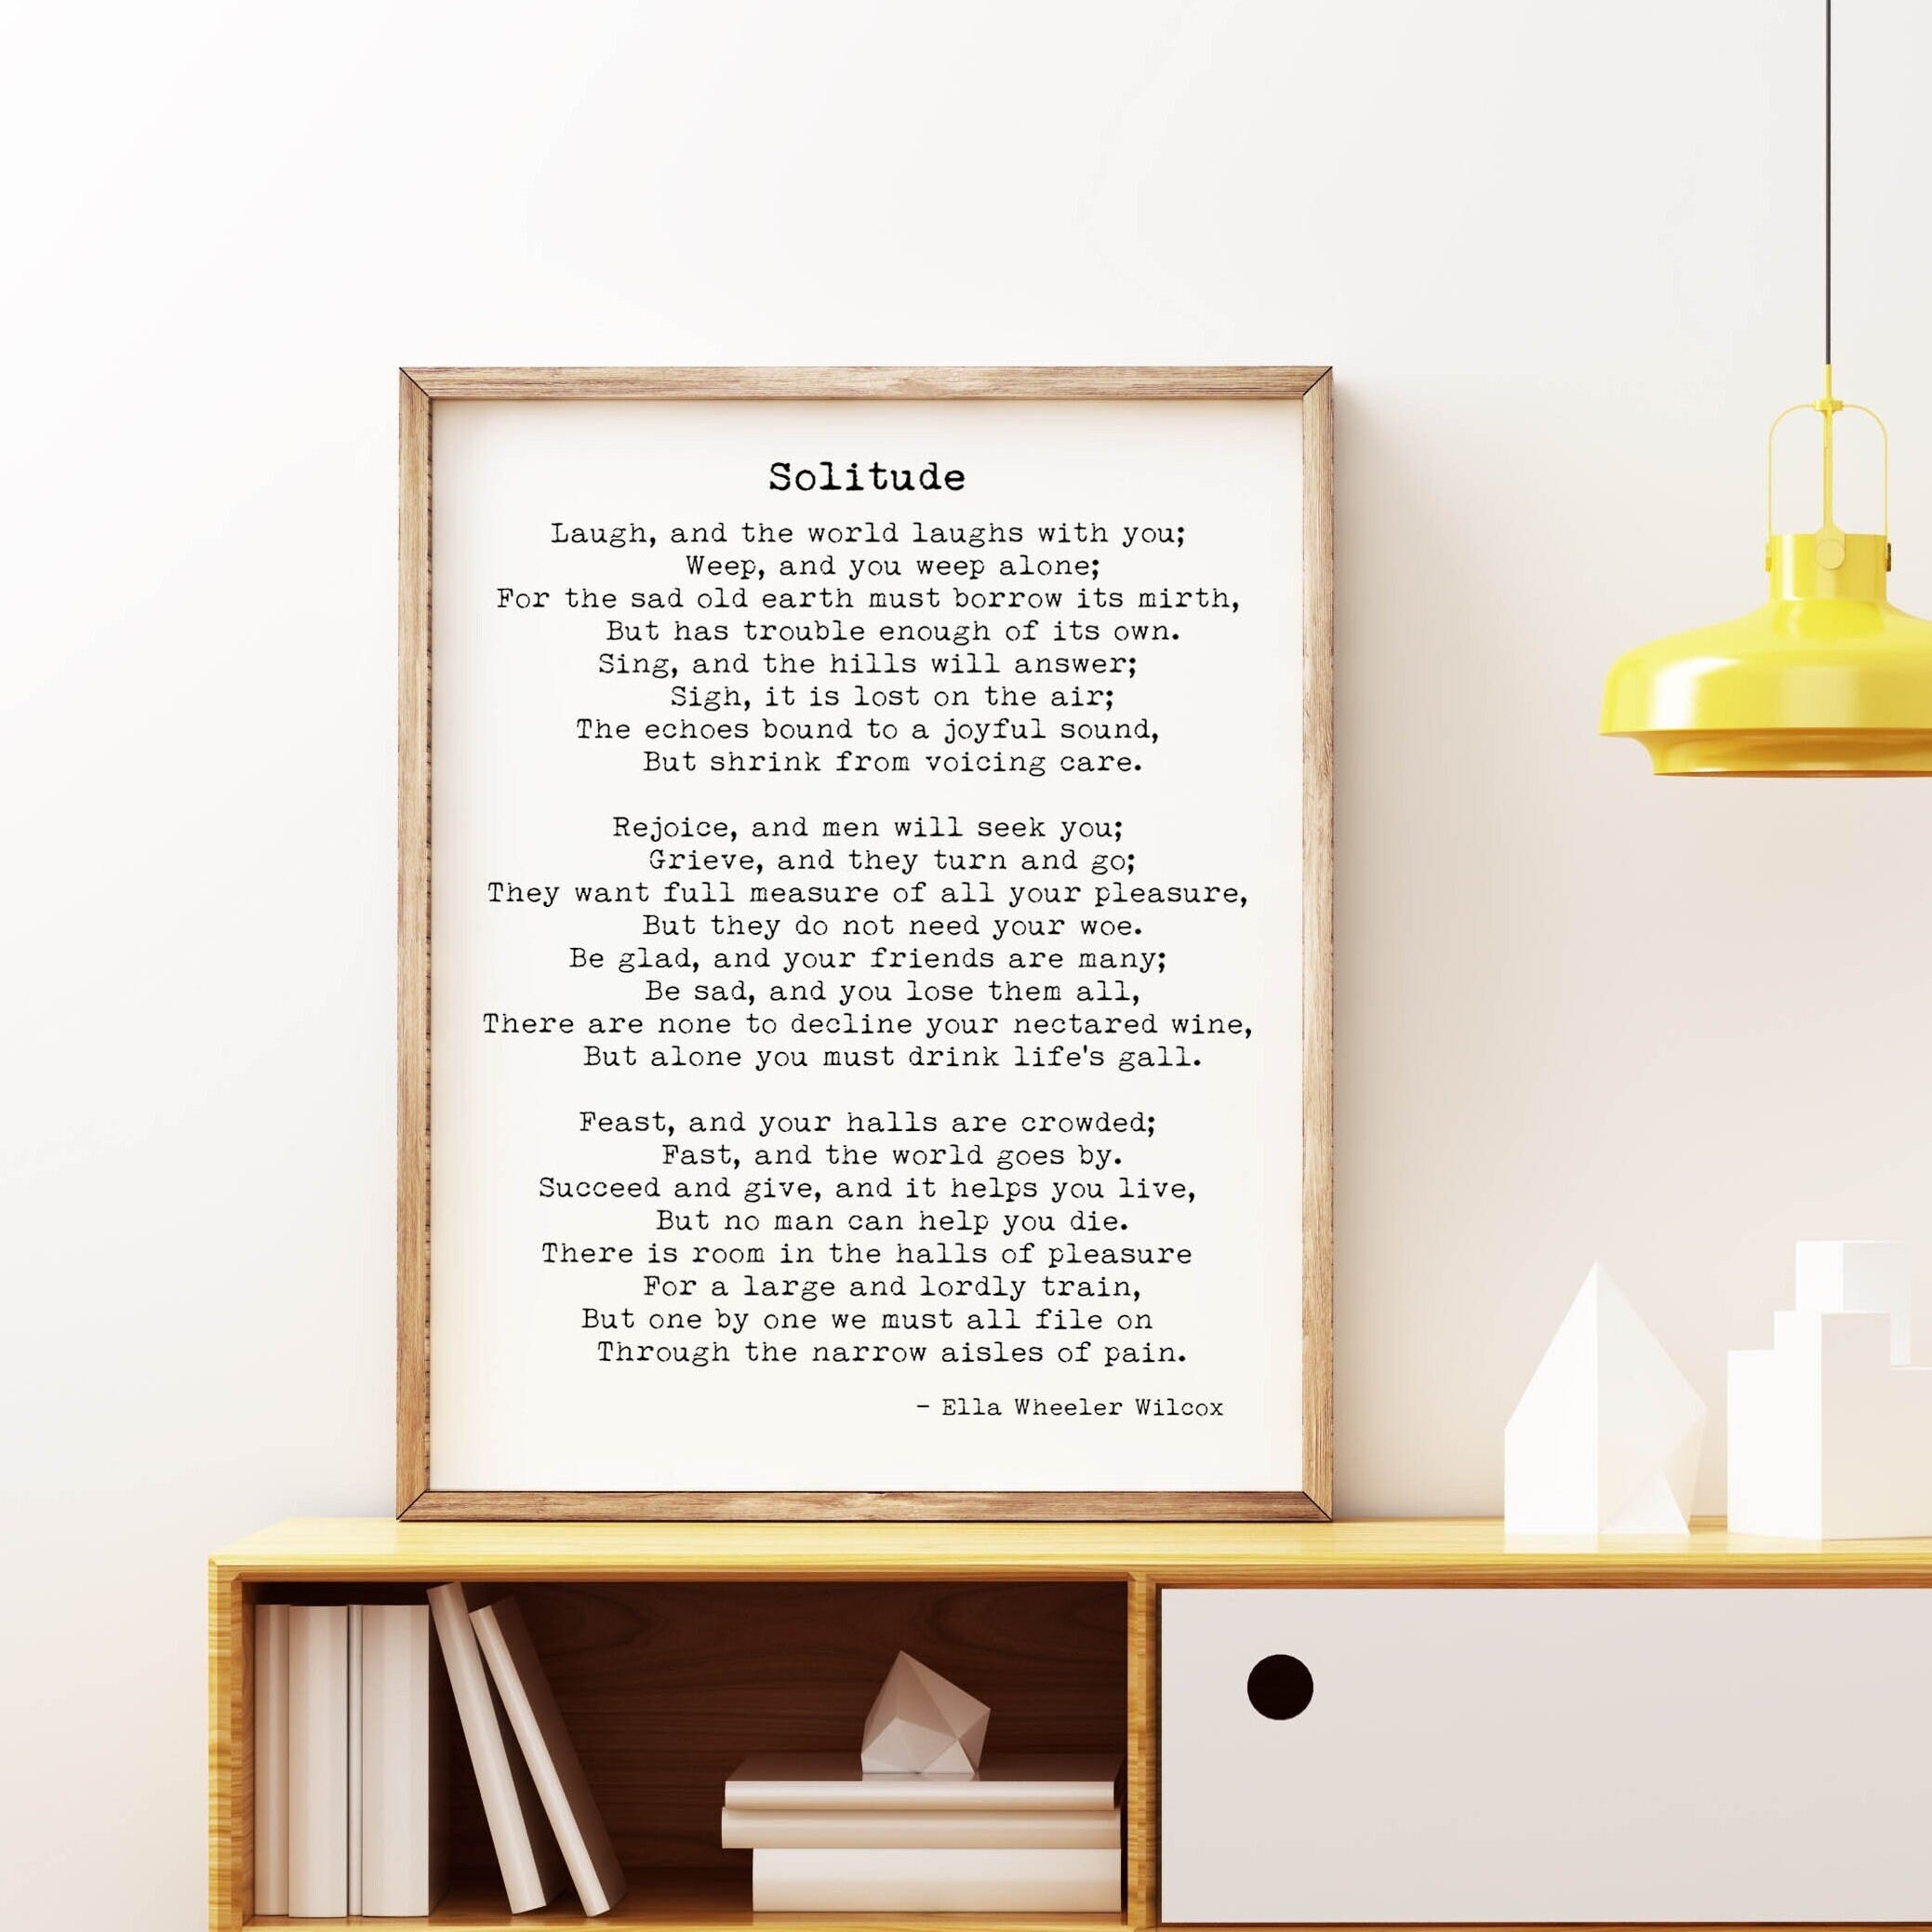 Solitude Poem Print, Laugh And The World Laughs With You Ella Wheeler Wilcox Poem Print